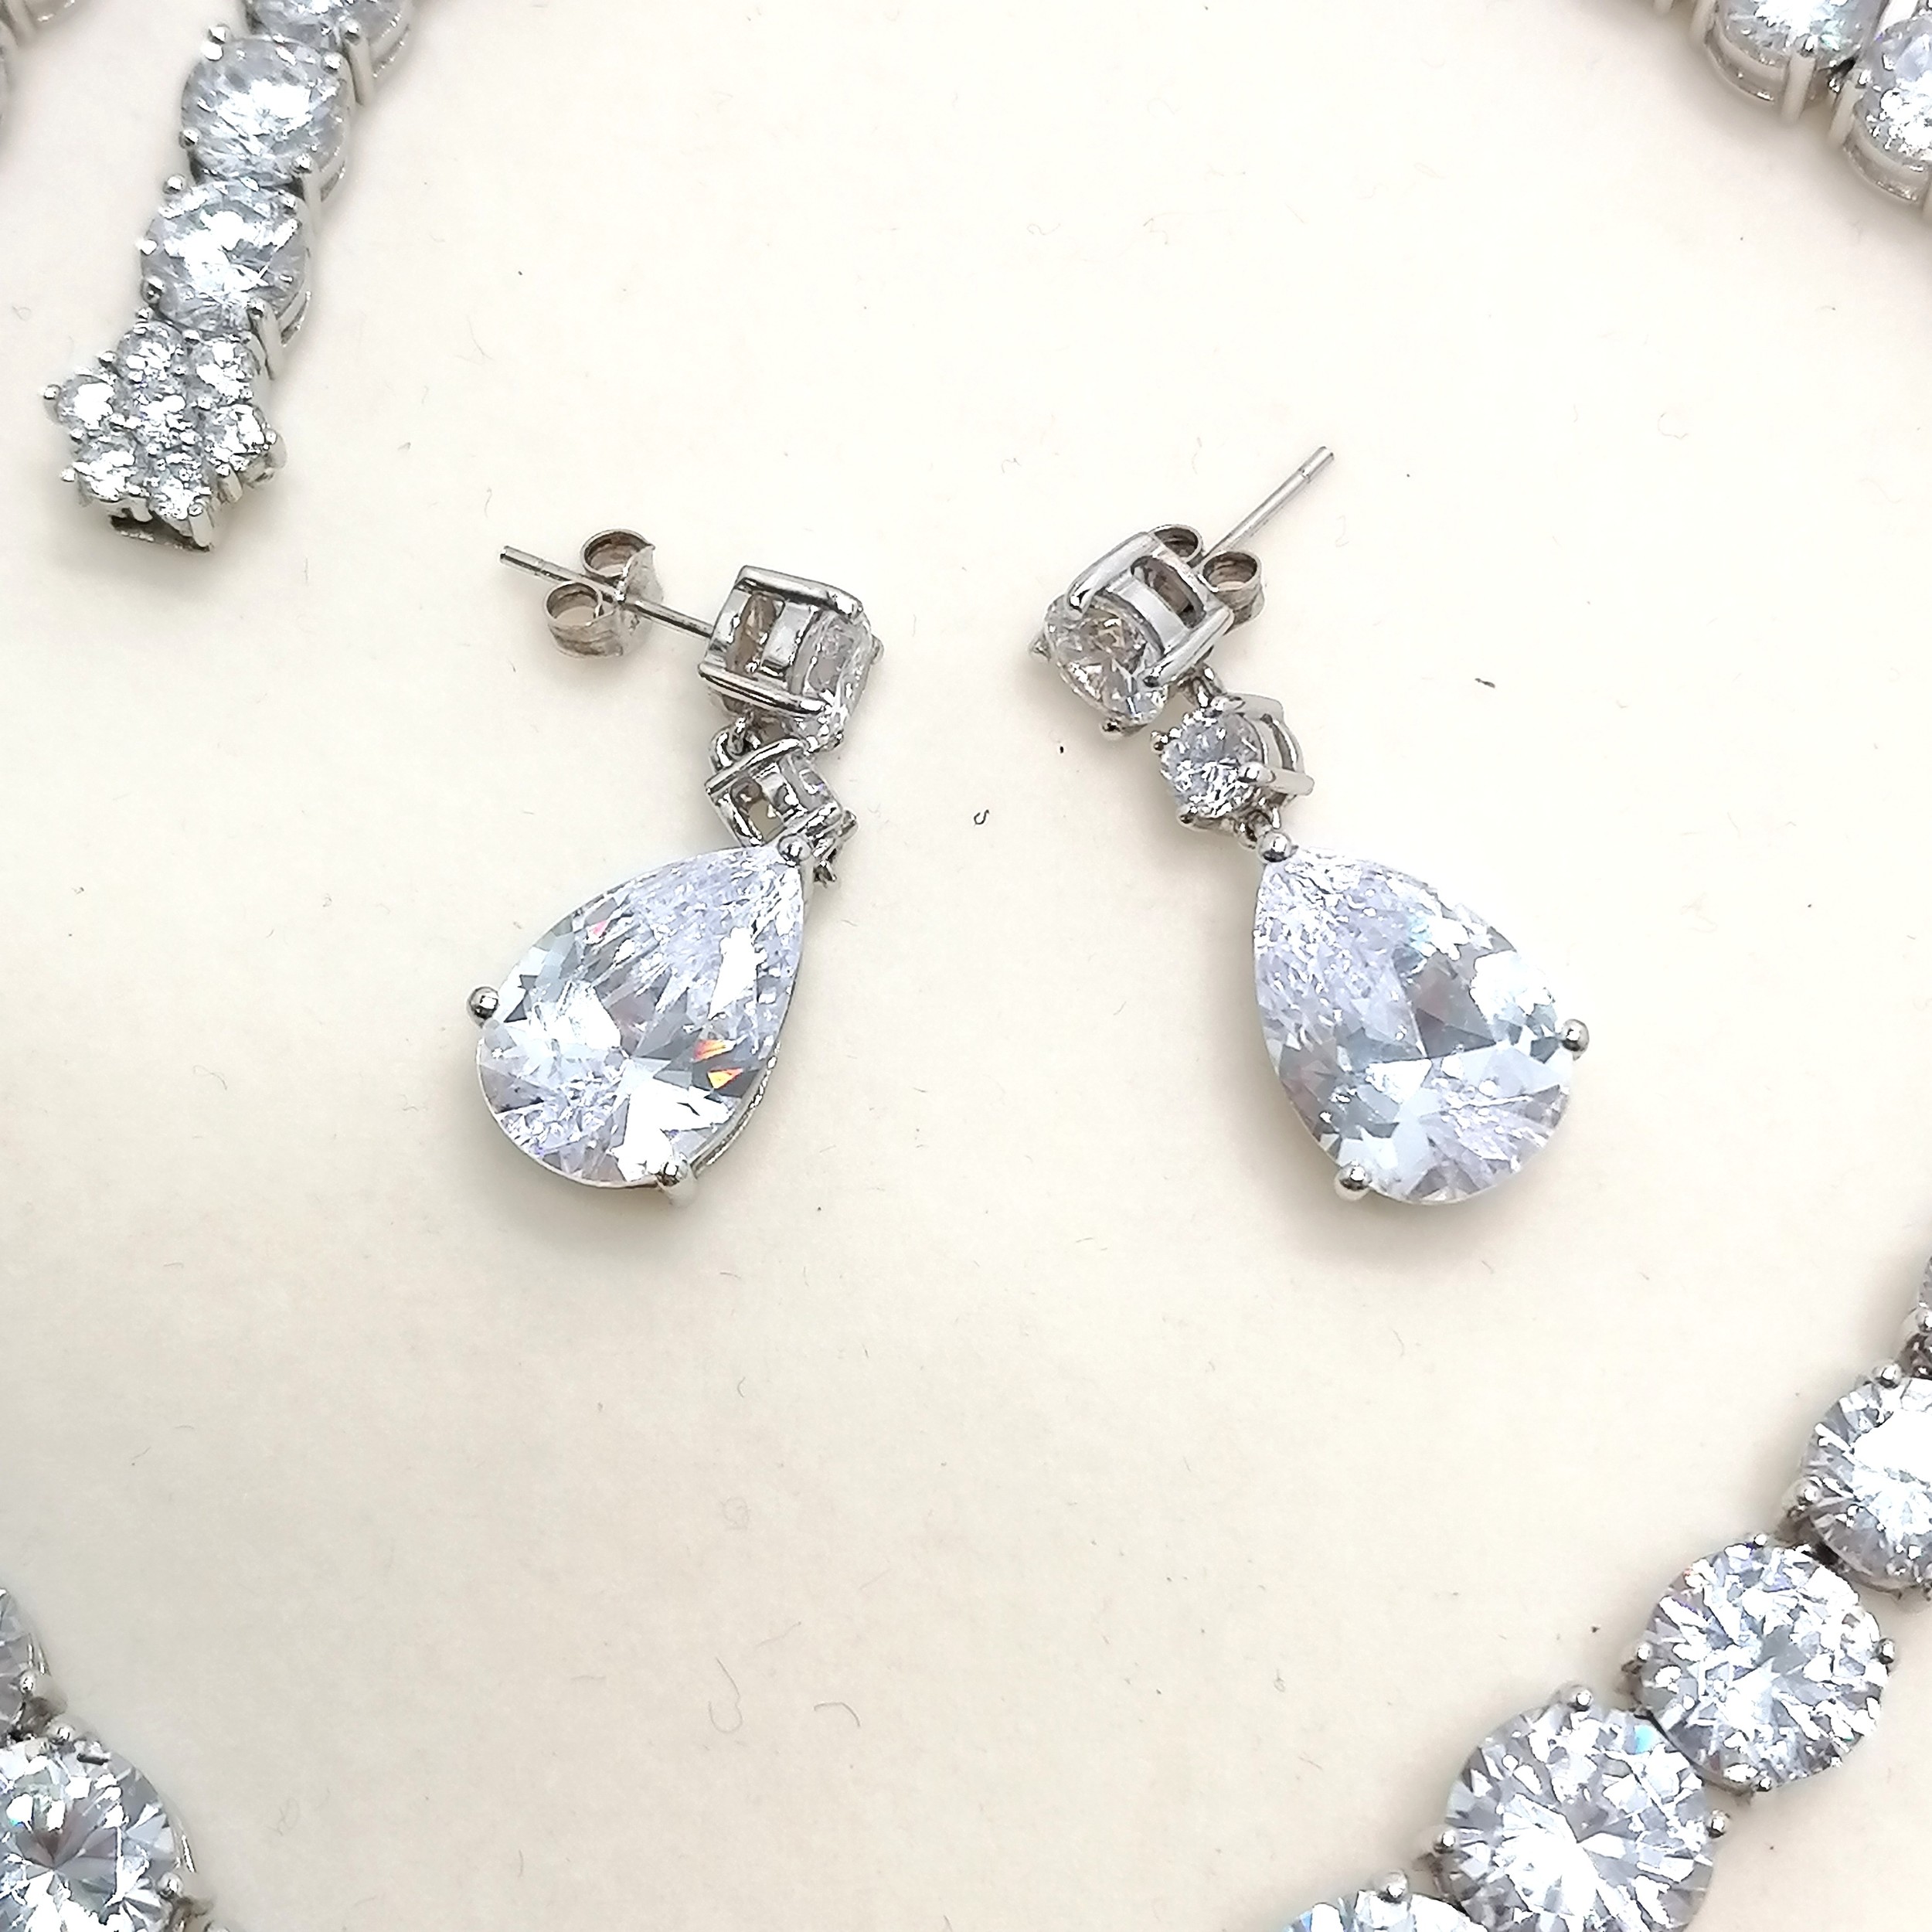 Silver hallmarked white stone / crystal necklace (47cm) with pendant drop and matching earrings (3cm - Image 4 of 4